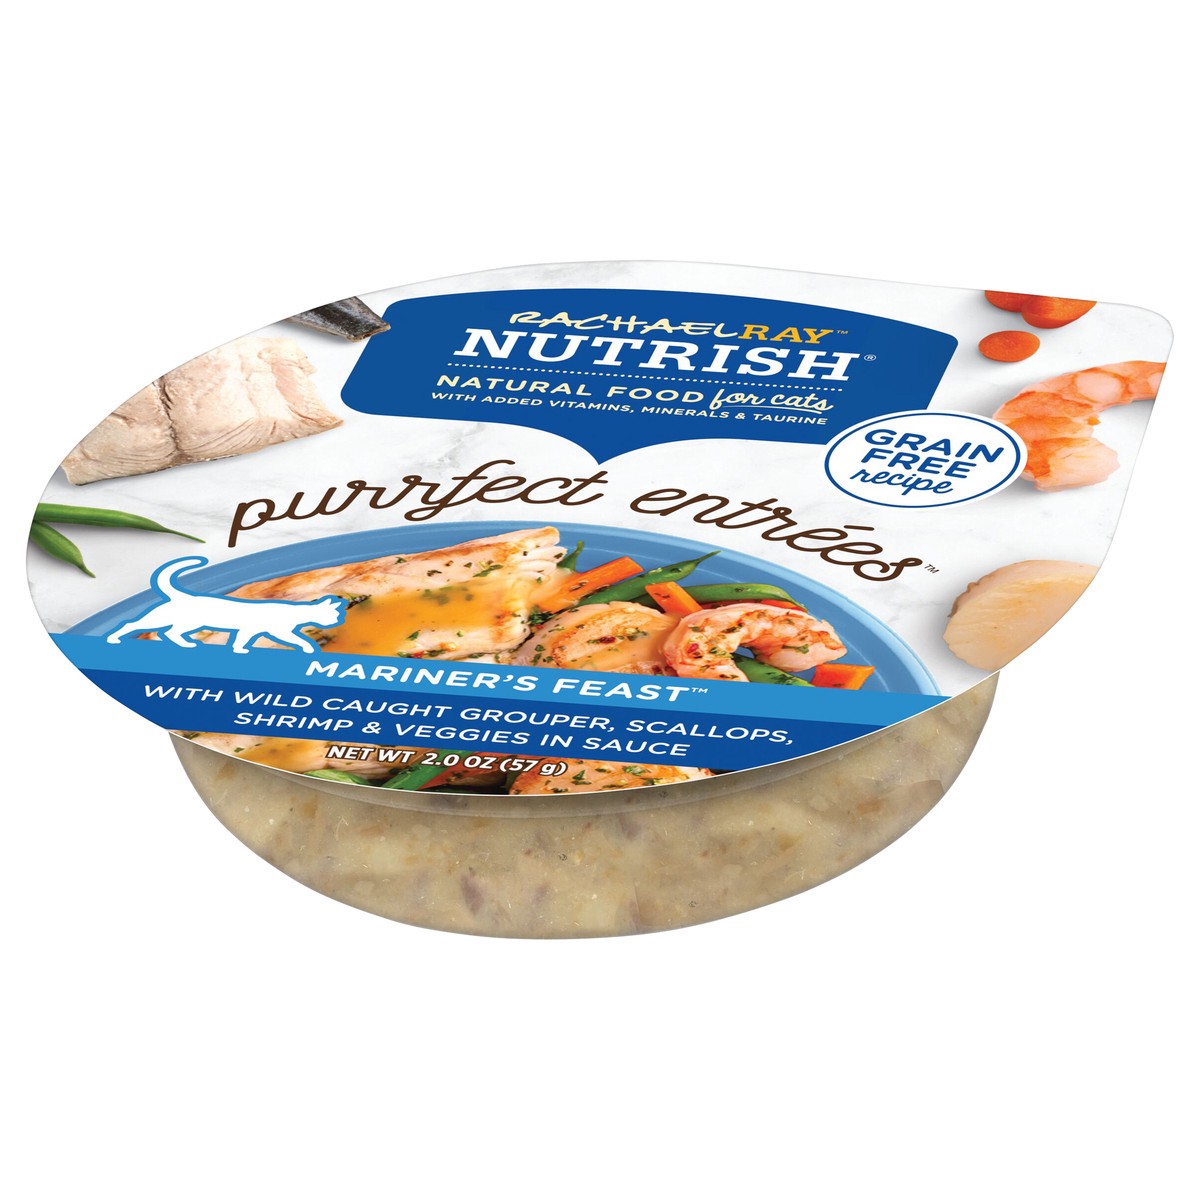 slide 8 of 11, Rachael Ray Nutrish Purrfect Entrees Mariner's Feast With Wild Caught Grouper, Scallops, Shrimp & Veggies in Sauce, 2-oz cup, 2 oz